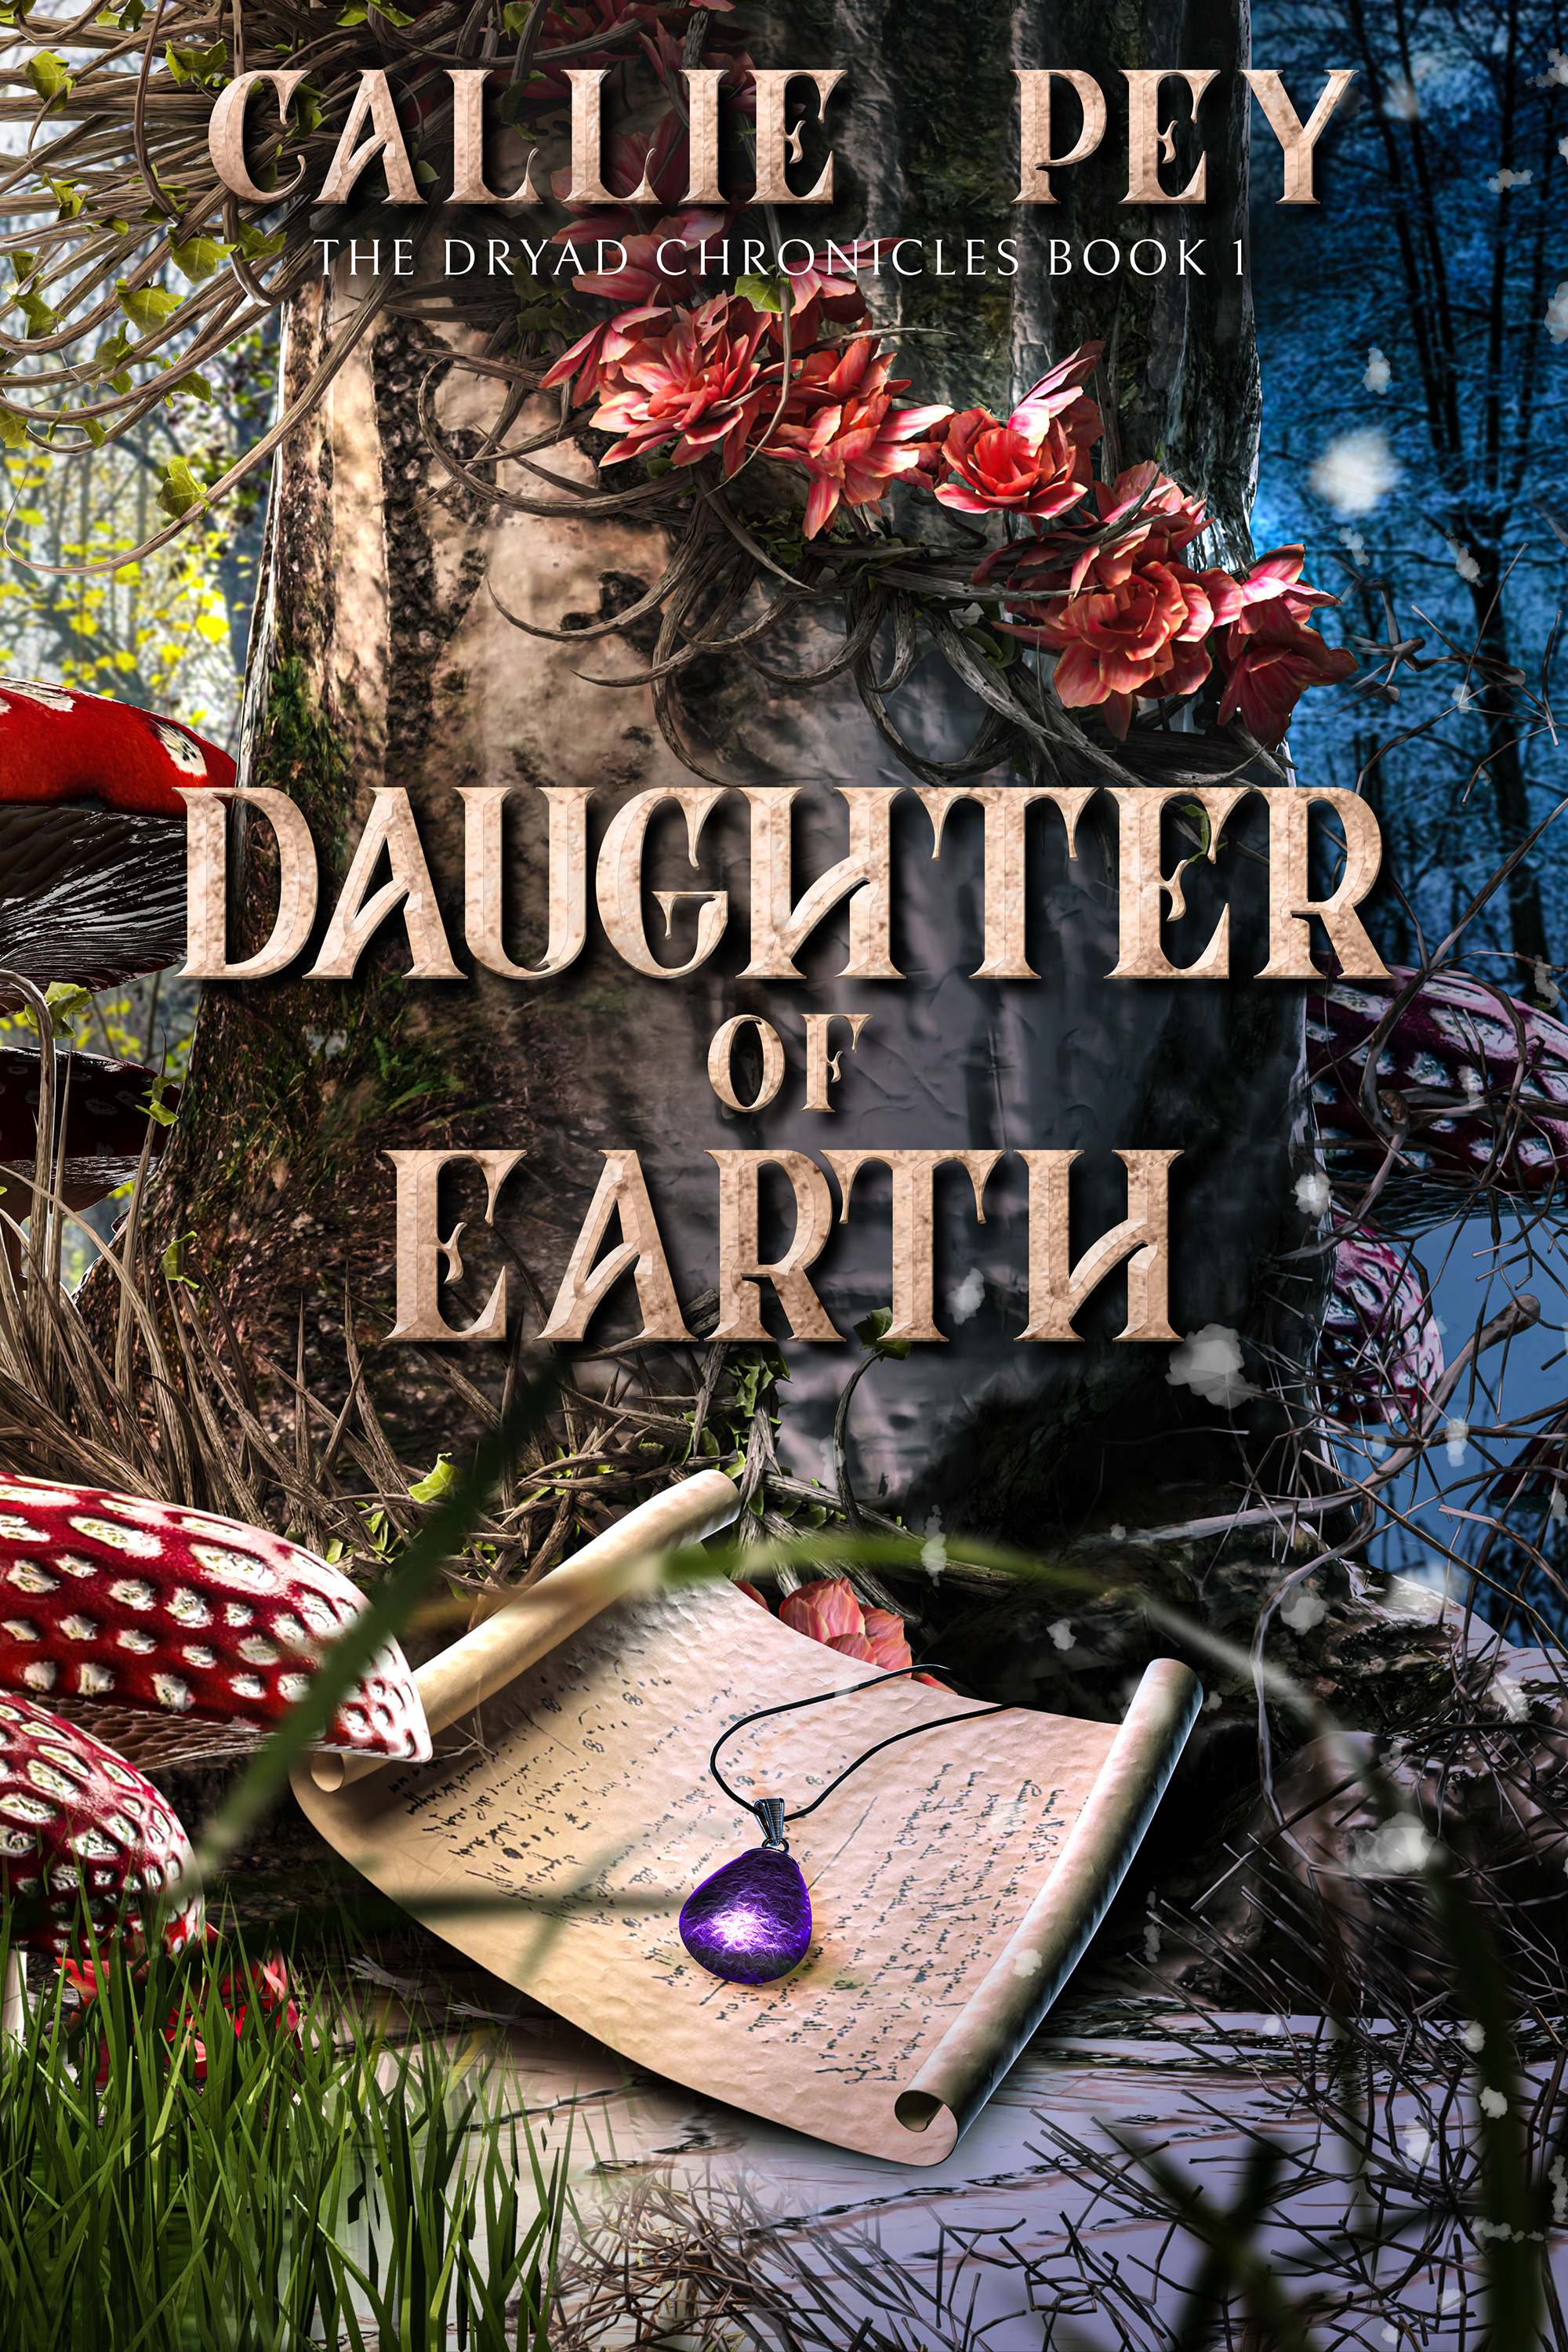 DAUGHTER OF EARTH ebook high-res